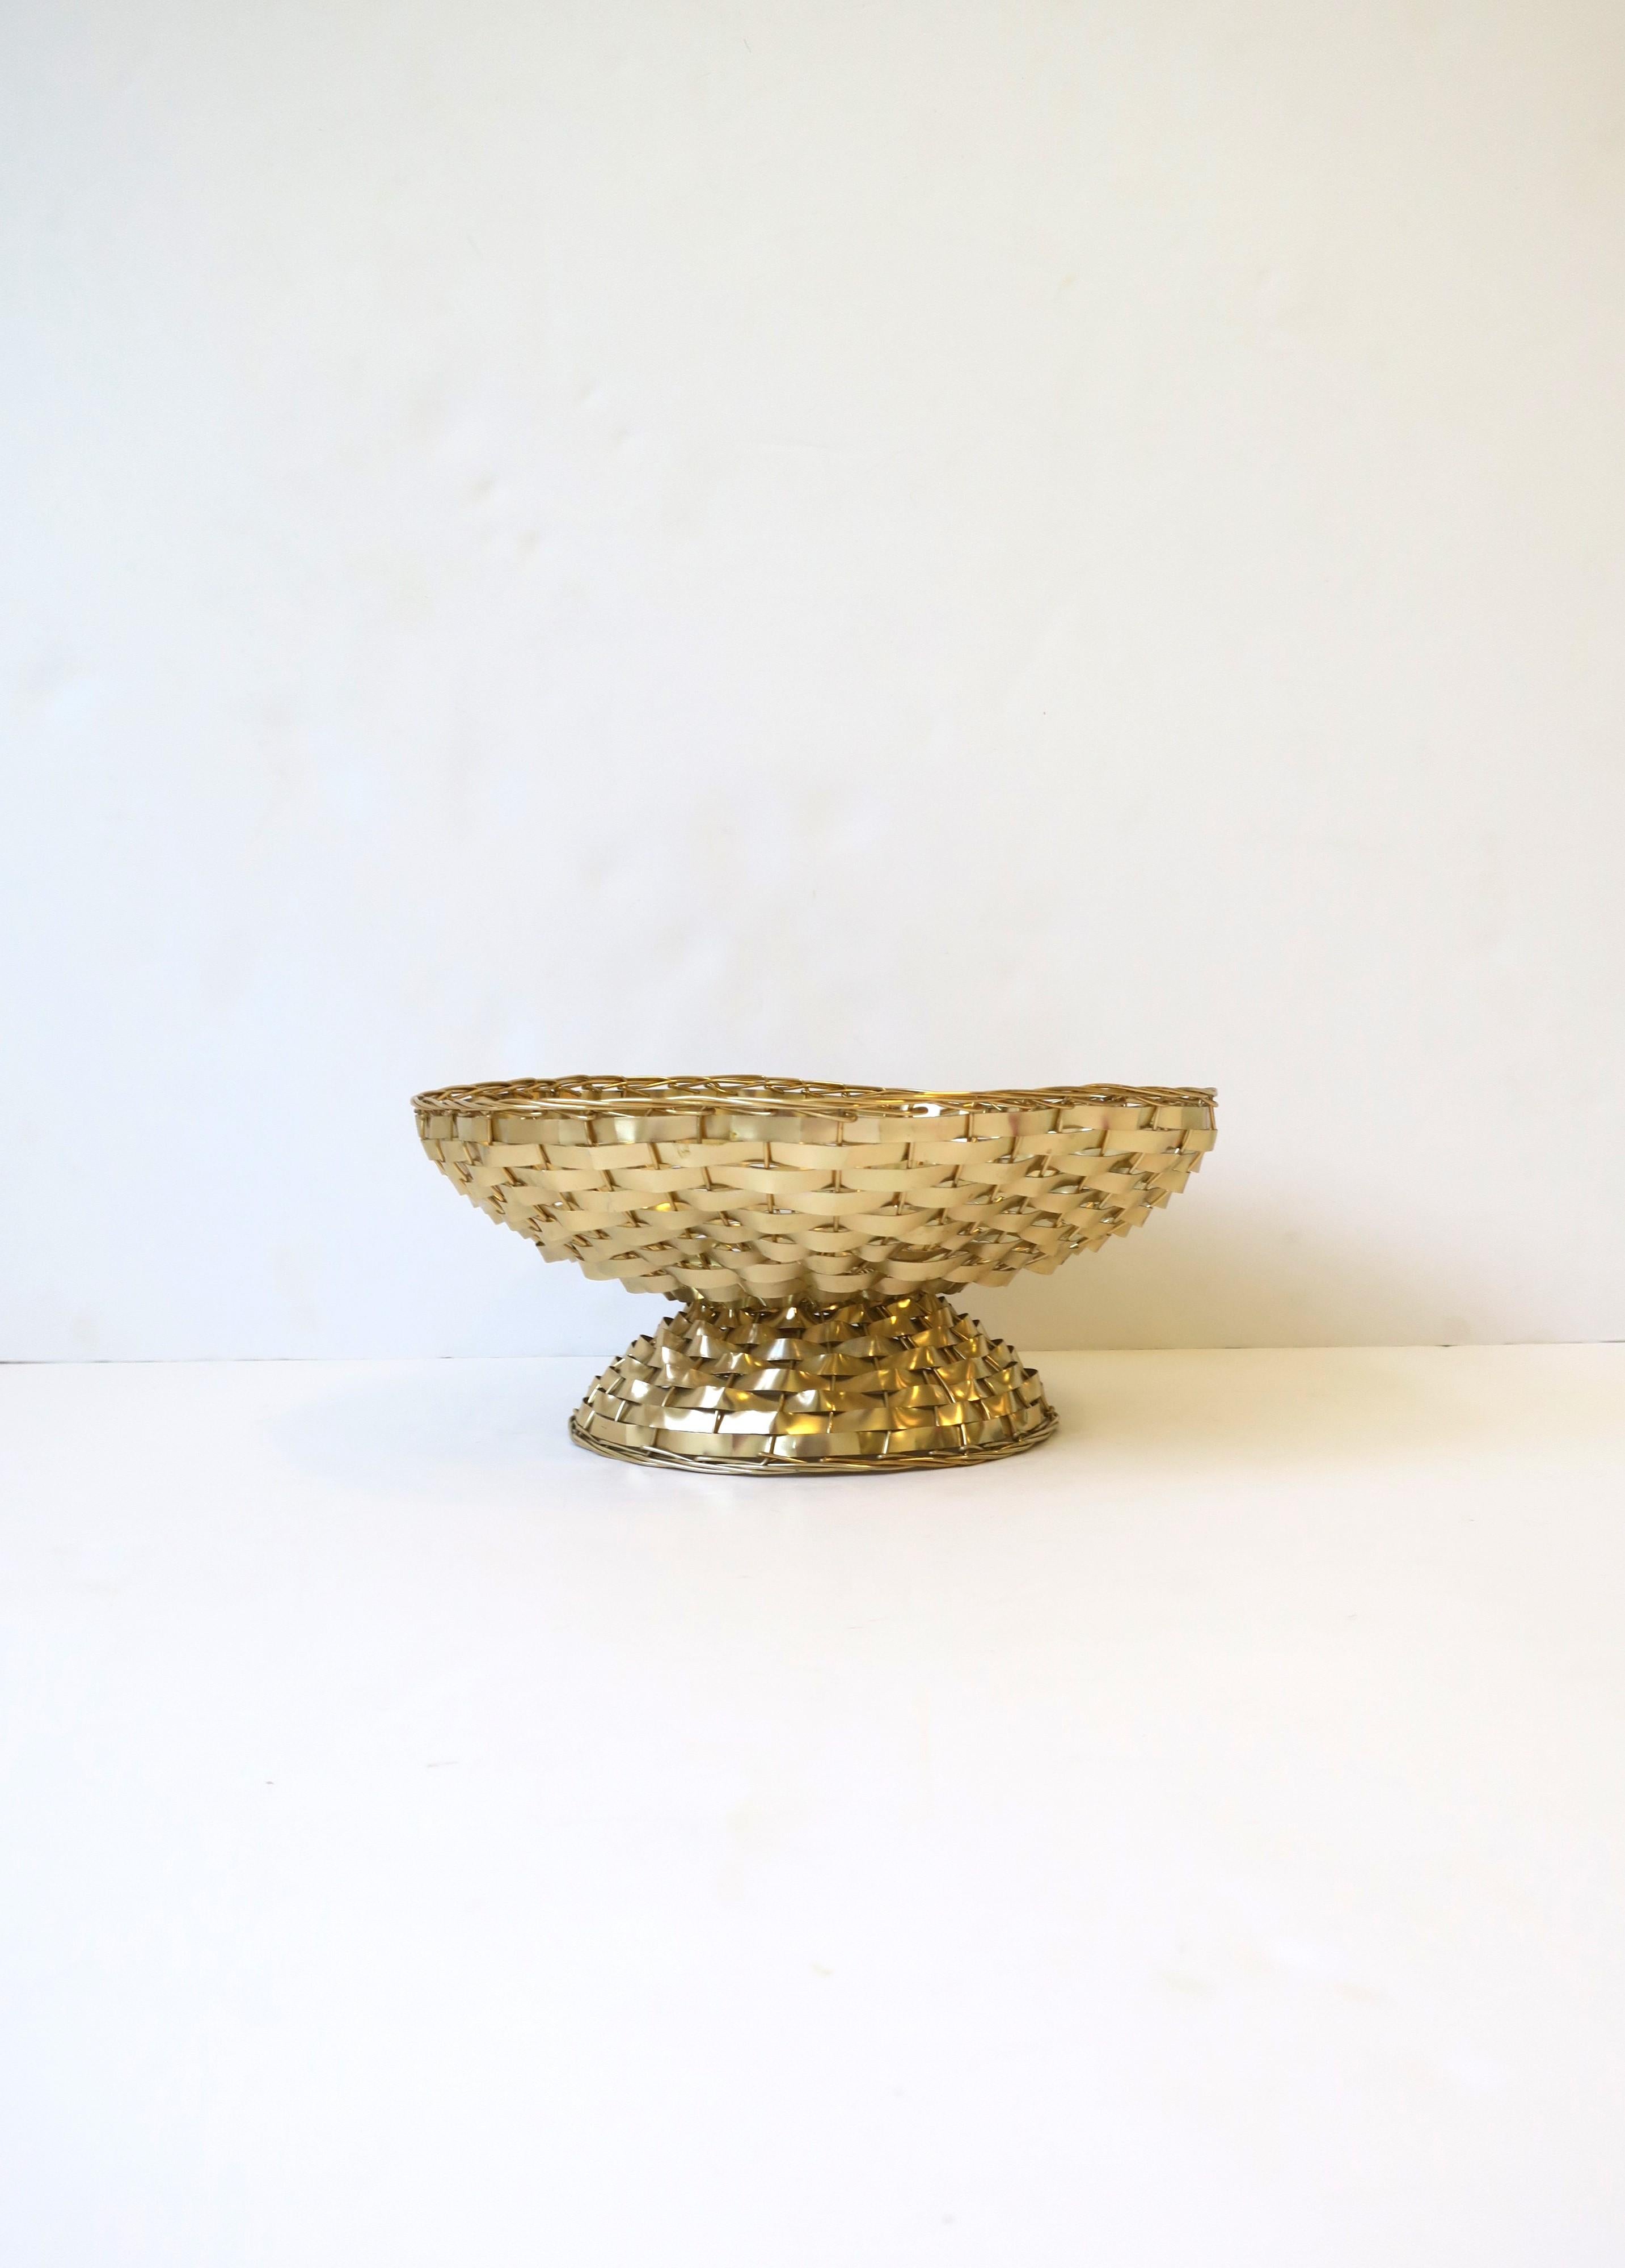 An Italian gold tone wire wicker basket, circa early to mid-20th century, Italy. A lightweight wire wicker compote with scalloped edge. Metal is a light rose/gold hue. A great piece to hold fruits and/or vegetables as demonstrated. Marked 